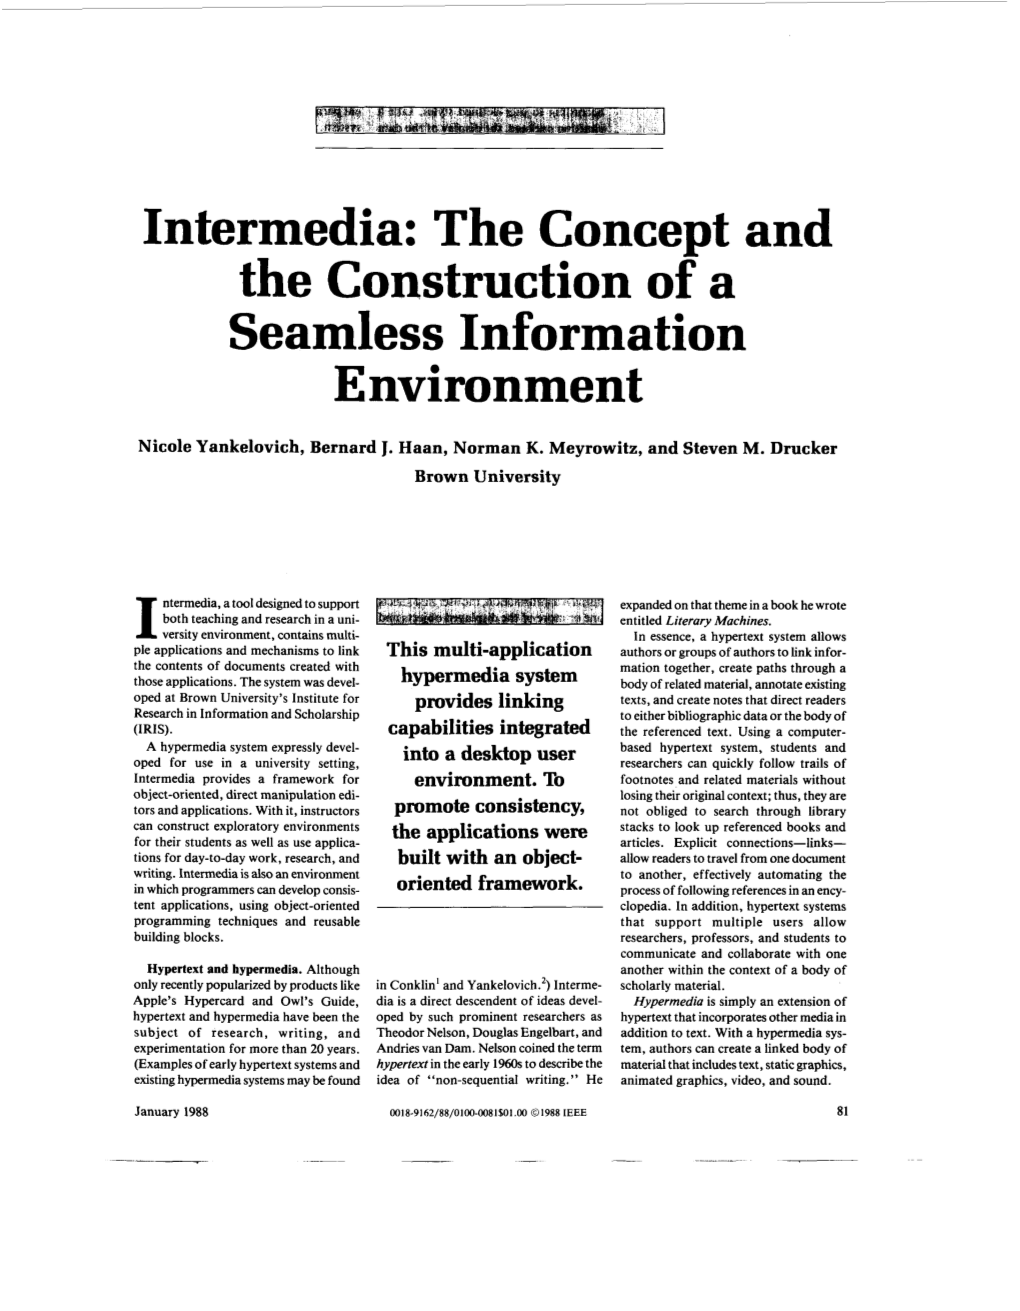 Intermedia: the Concedt and the Construction of a Seamless Information Environment